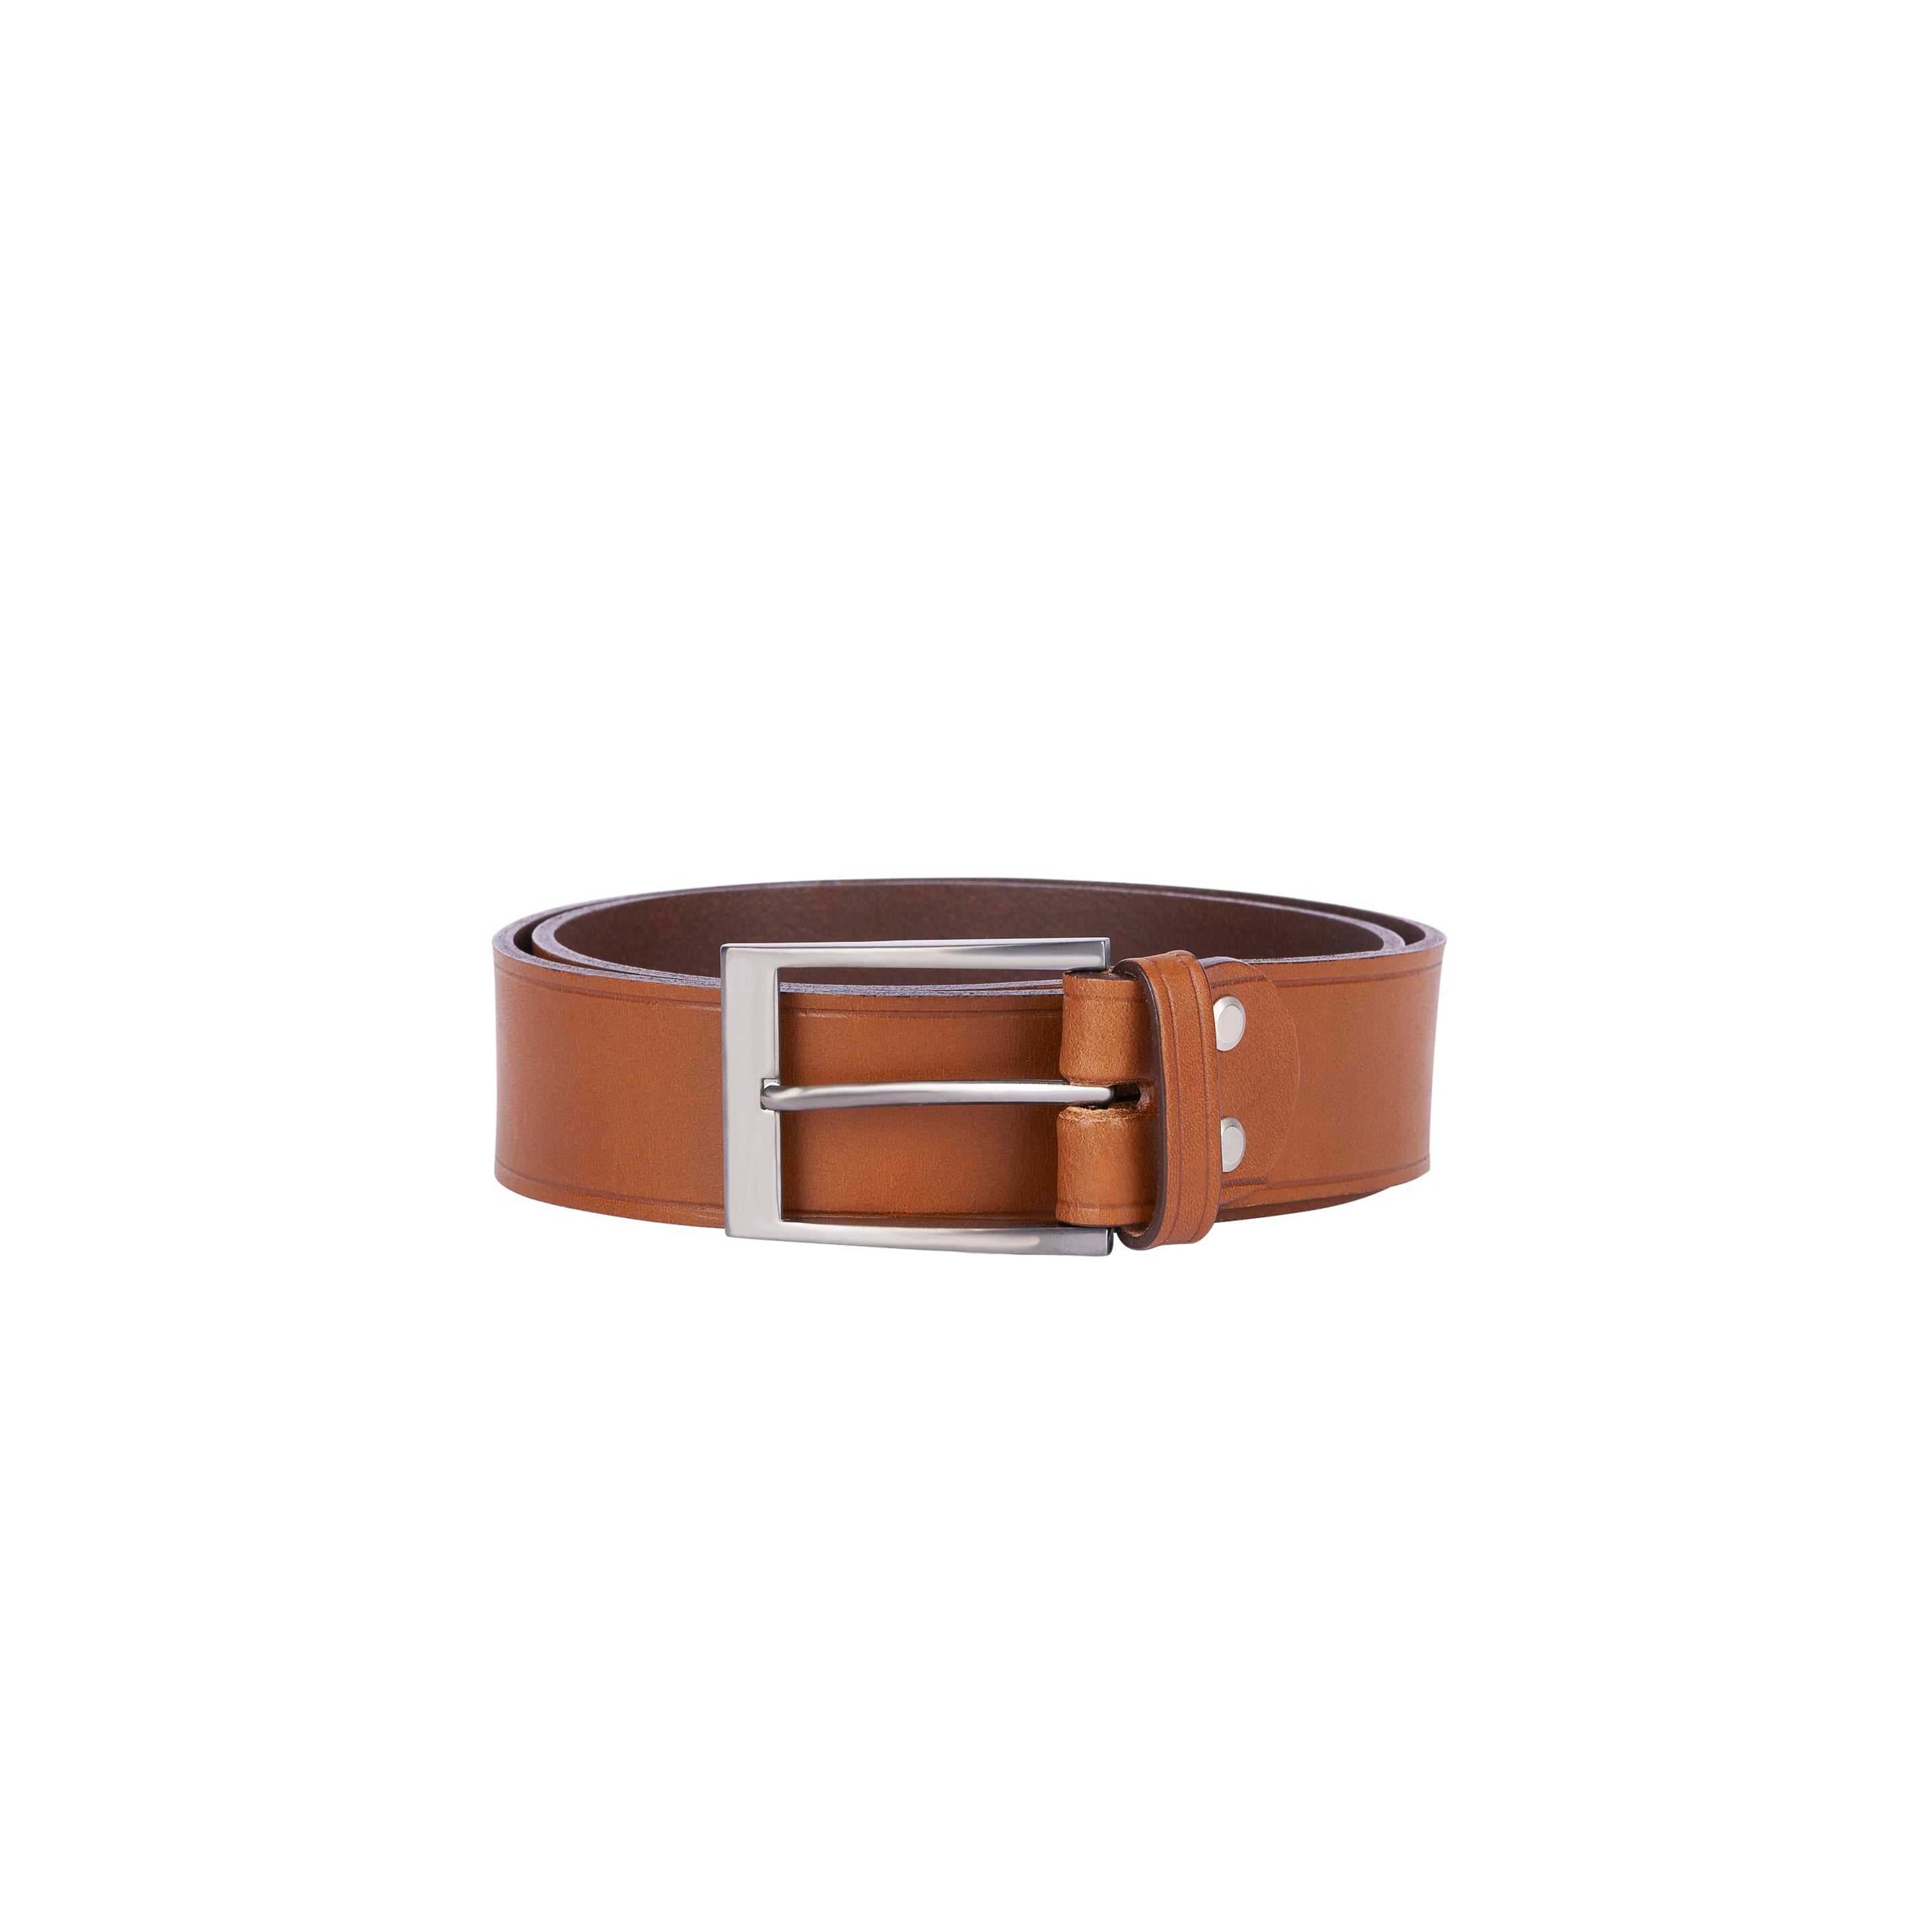 Leather belts - 100% Made in France - For your favorite trousers